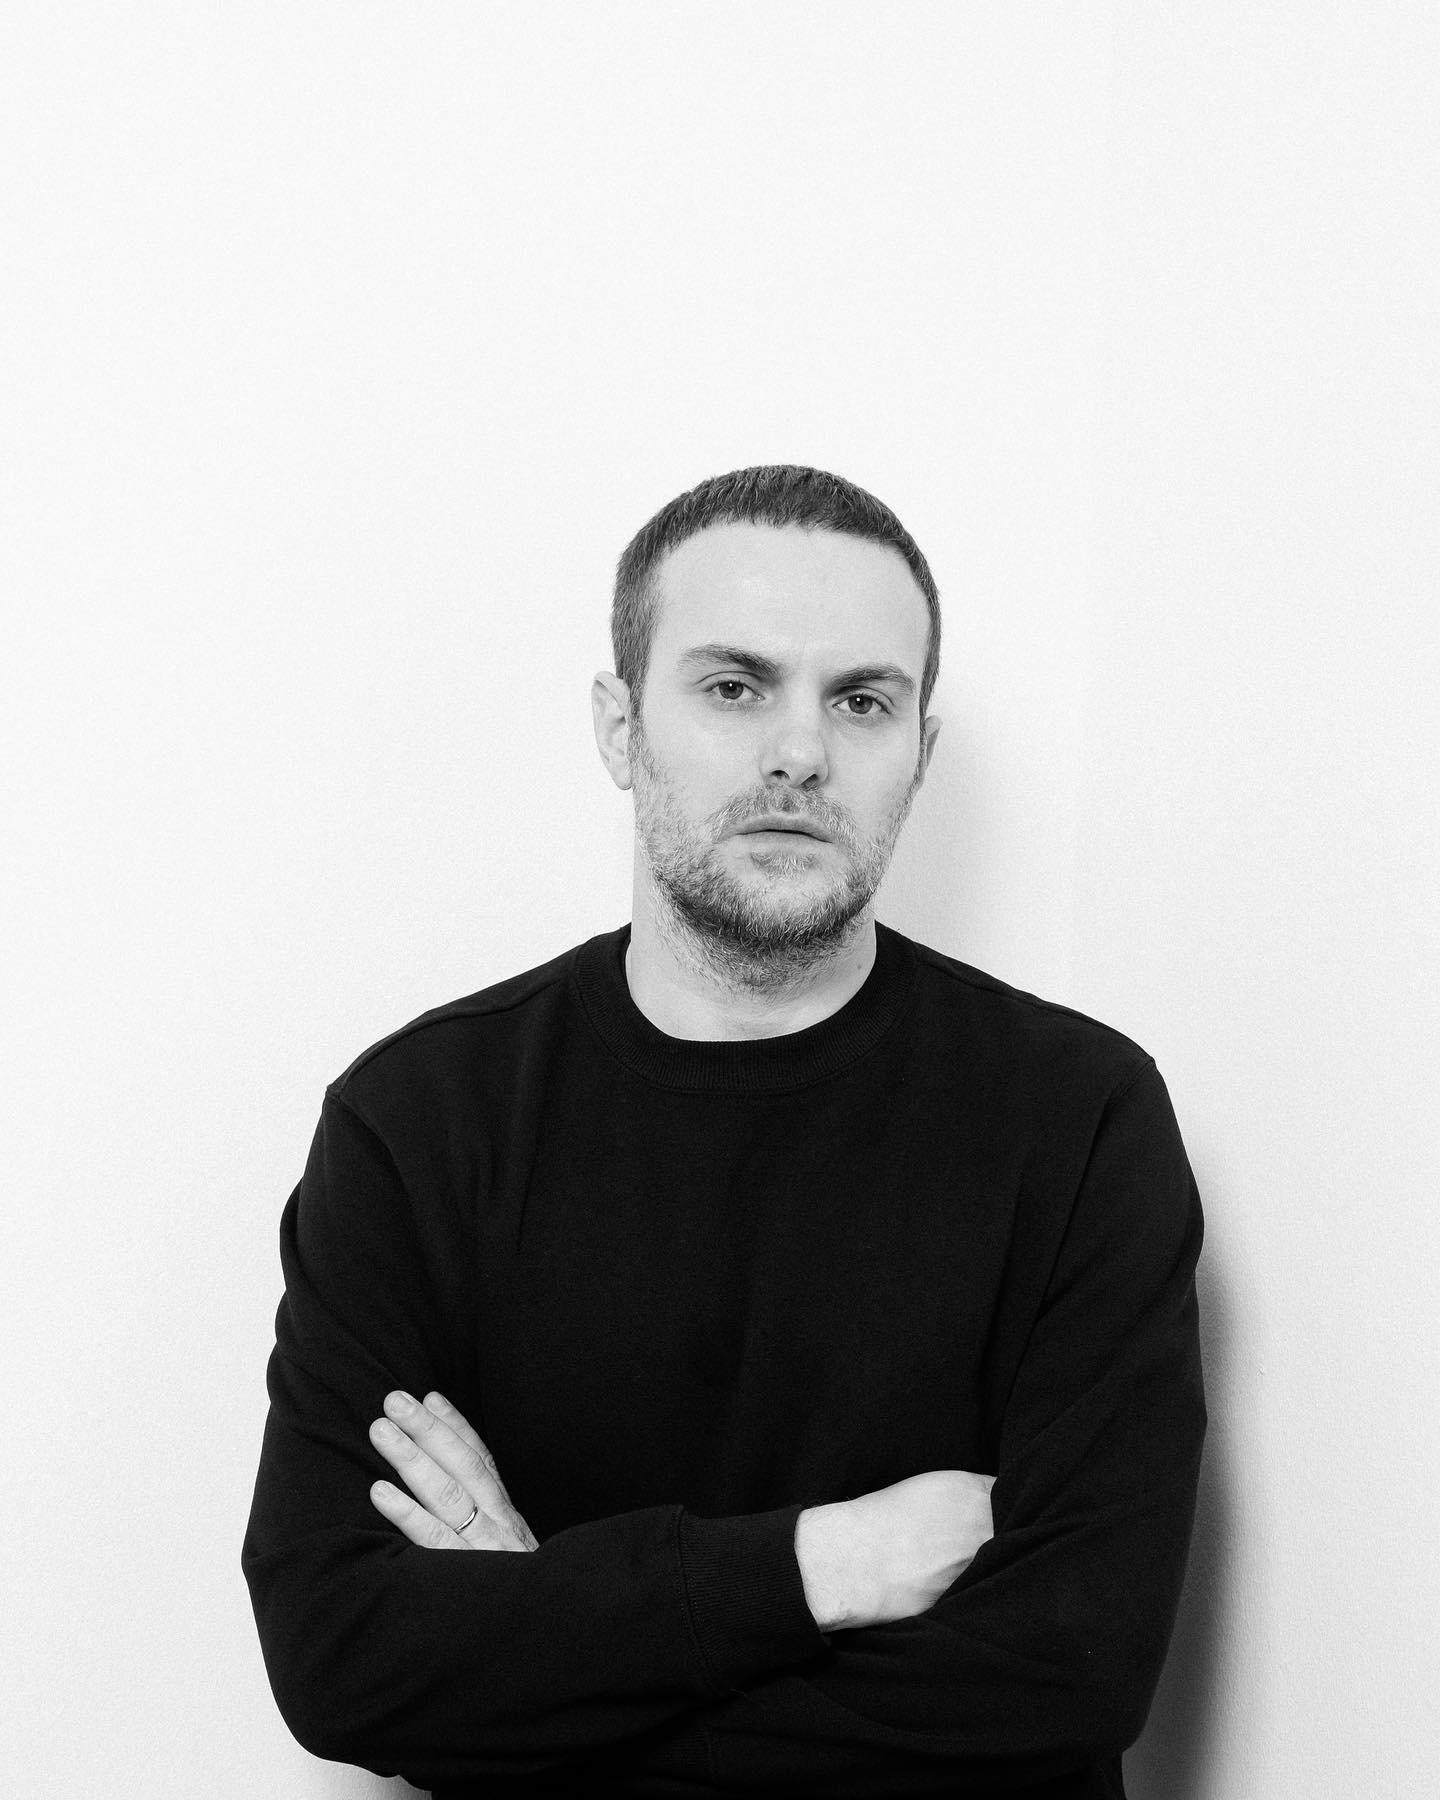 Gucci and Kering are pleased to announce that Sabato De Sarno will assume the role of Creative Direc